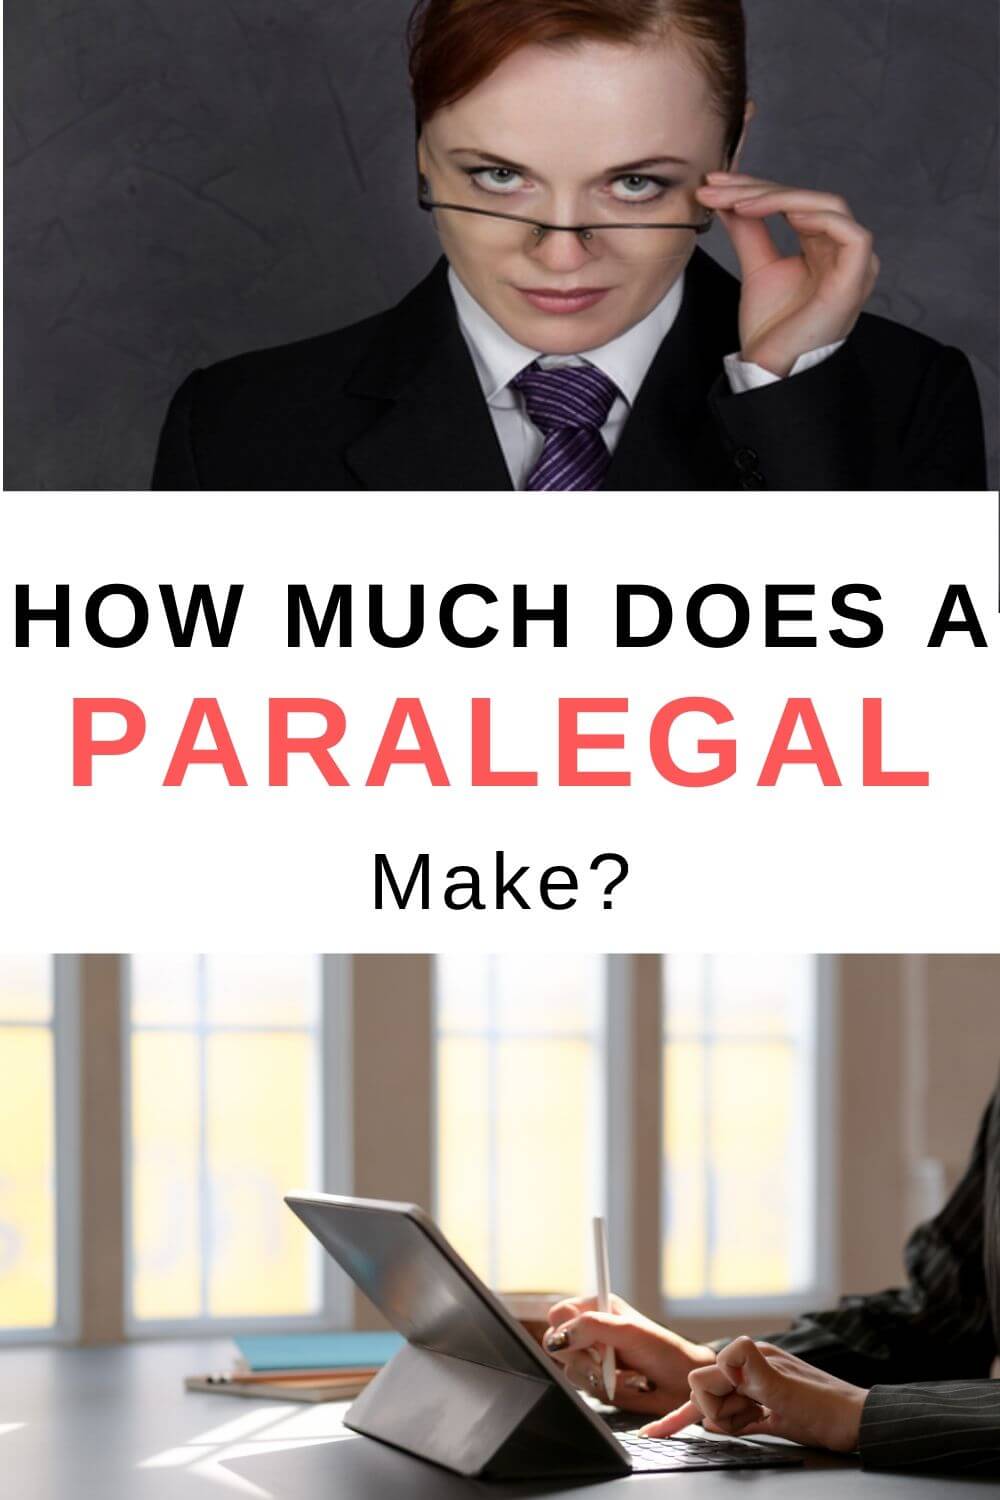 How much does a paralegal make?